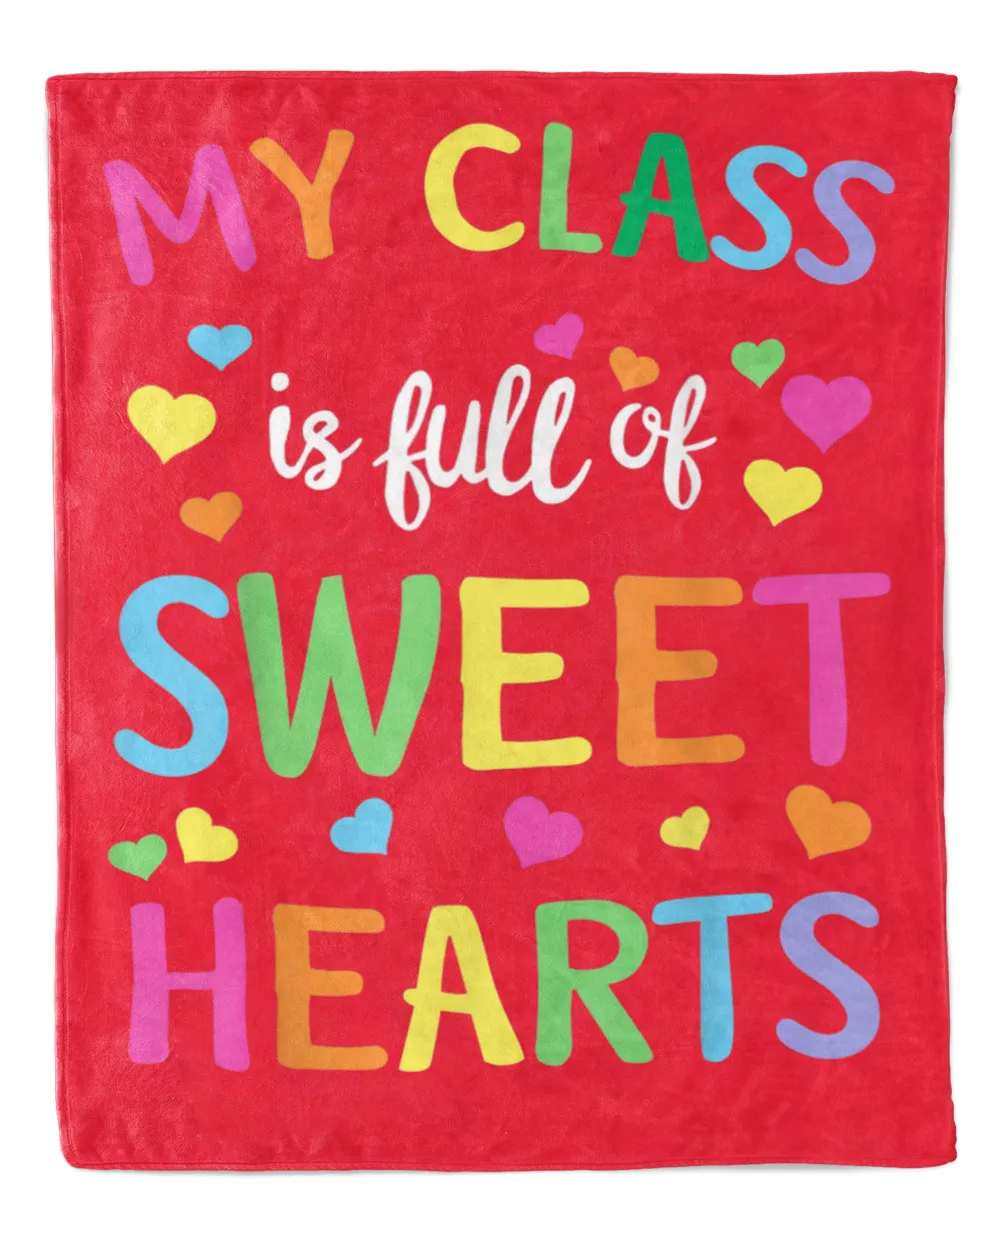 Teachers Valentines Day Shirt Class Full of Sweethearts